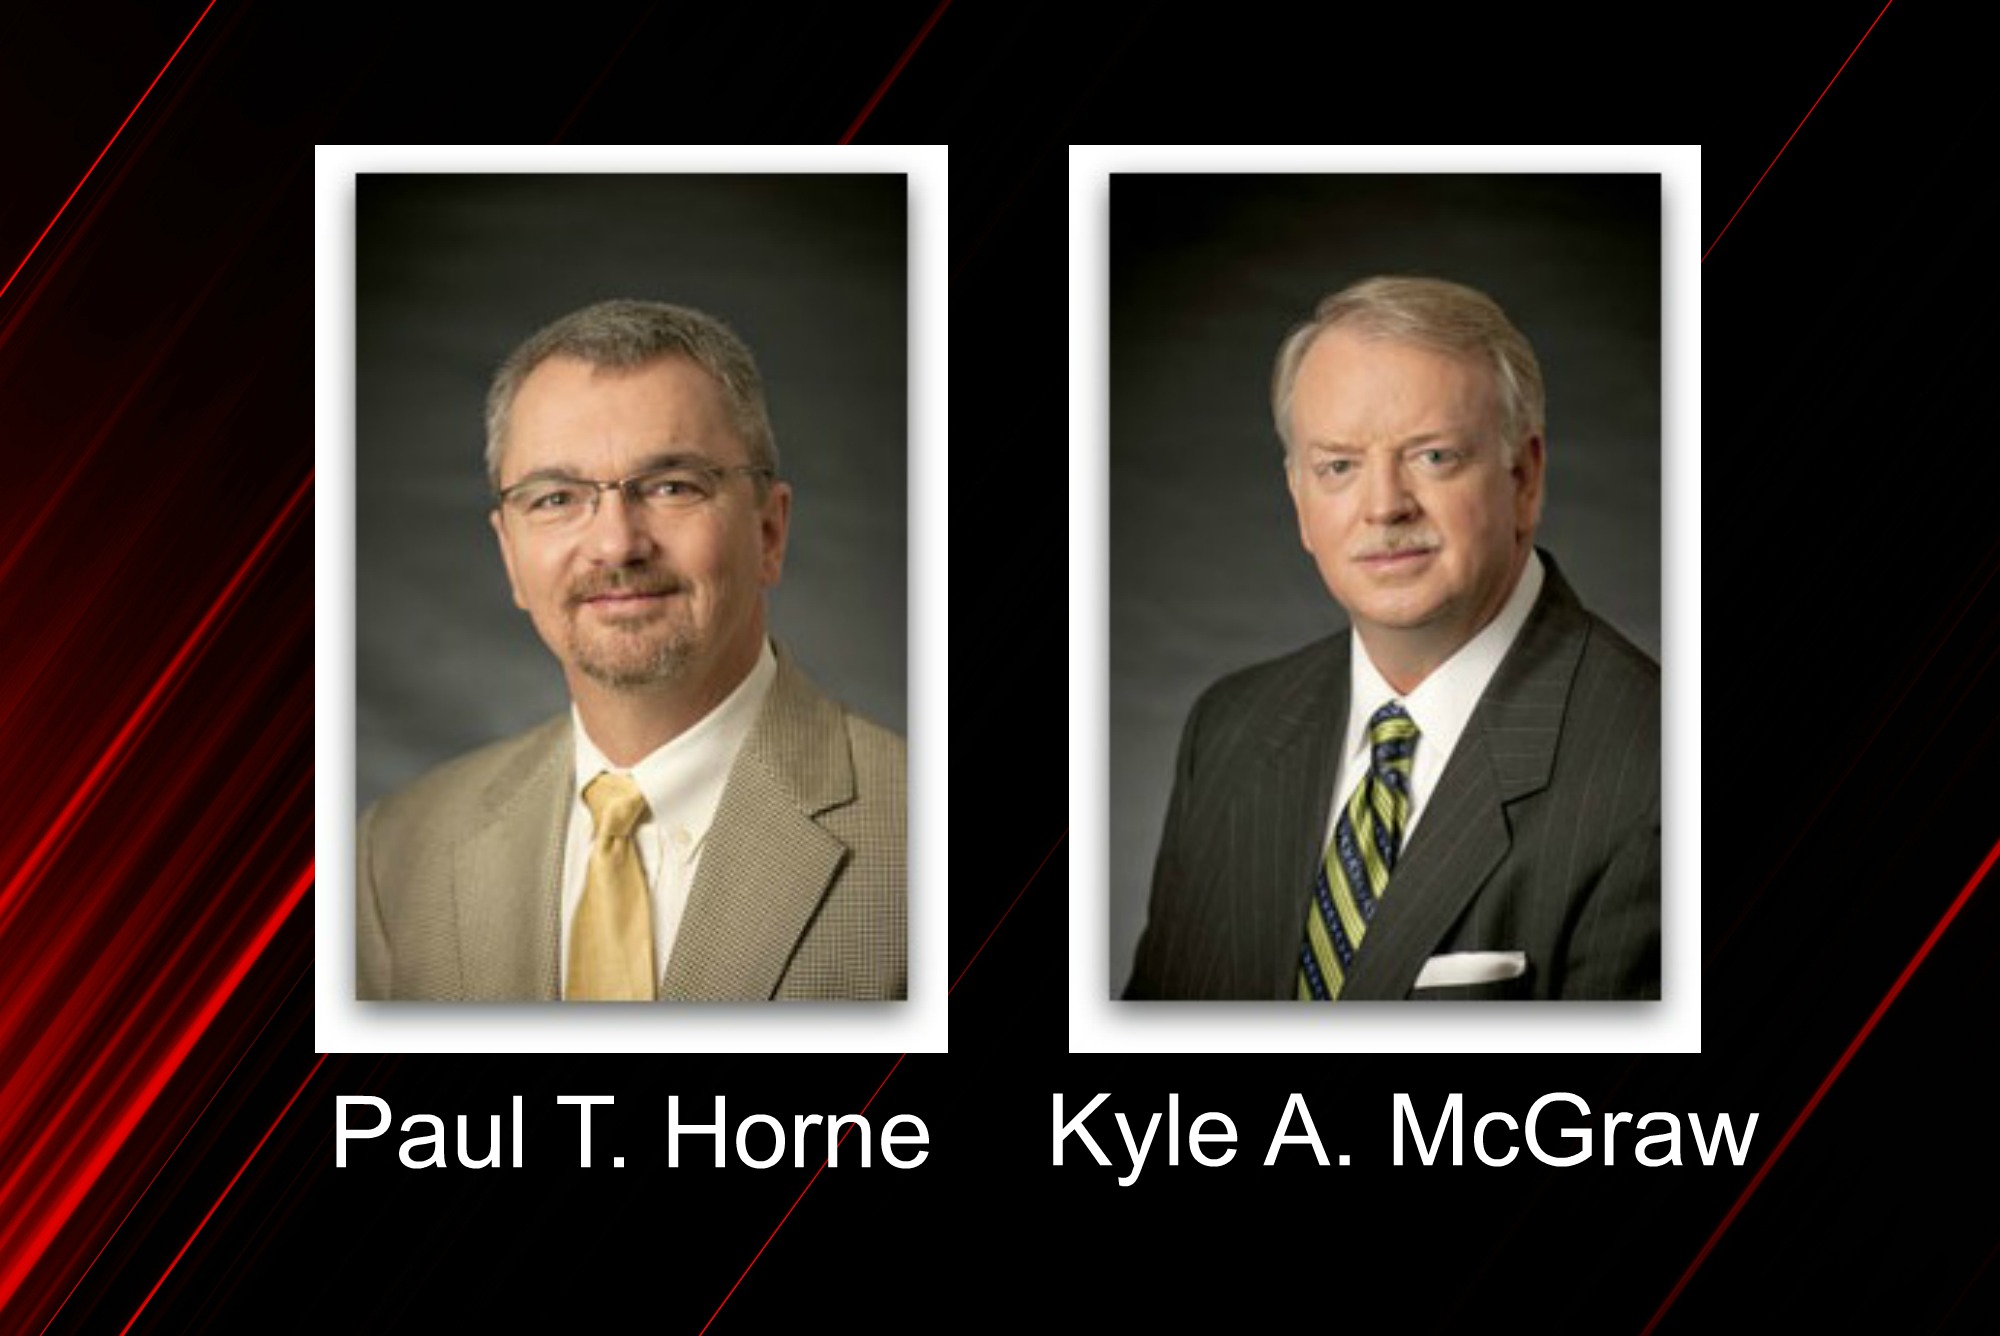 Paul T. Horne and Kyle A. McGraw (Source: Legacy Reserves Inc.)